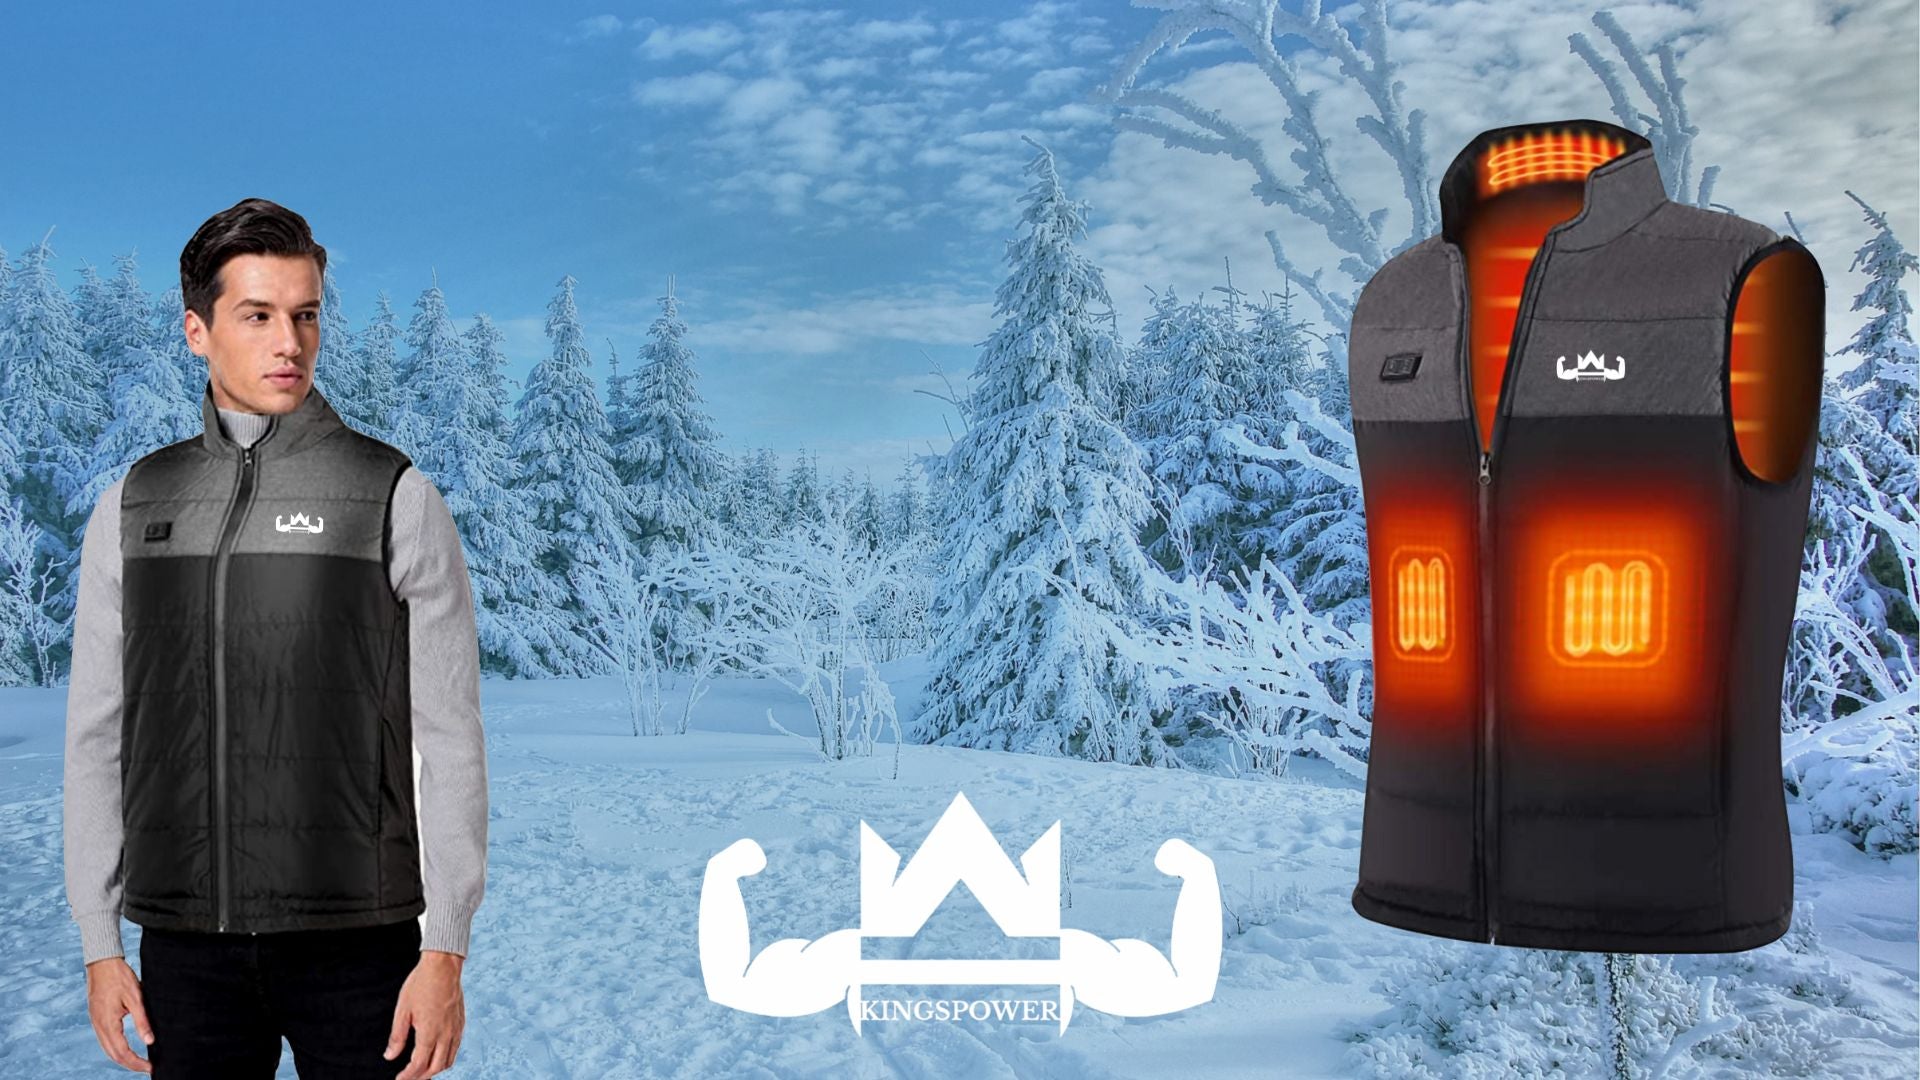 Carica il video: Manual of how to use the heated body warmer.